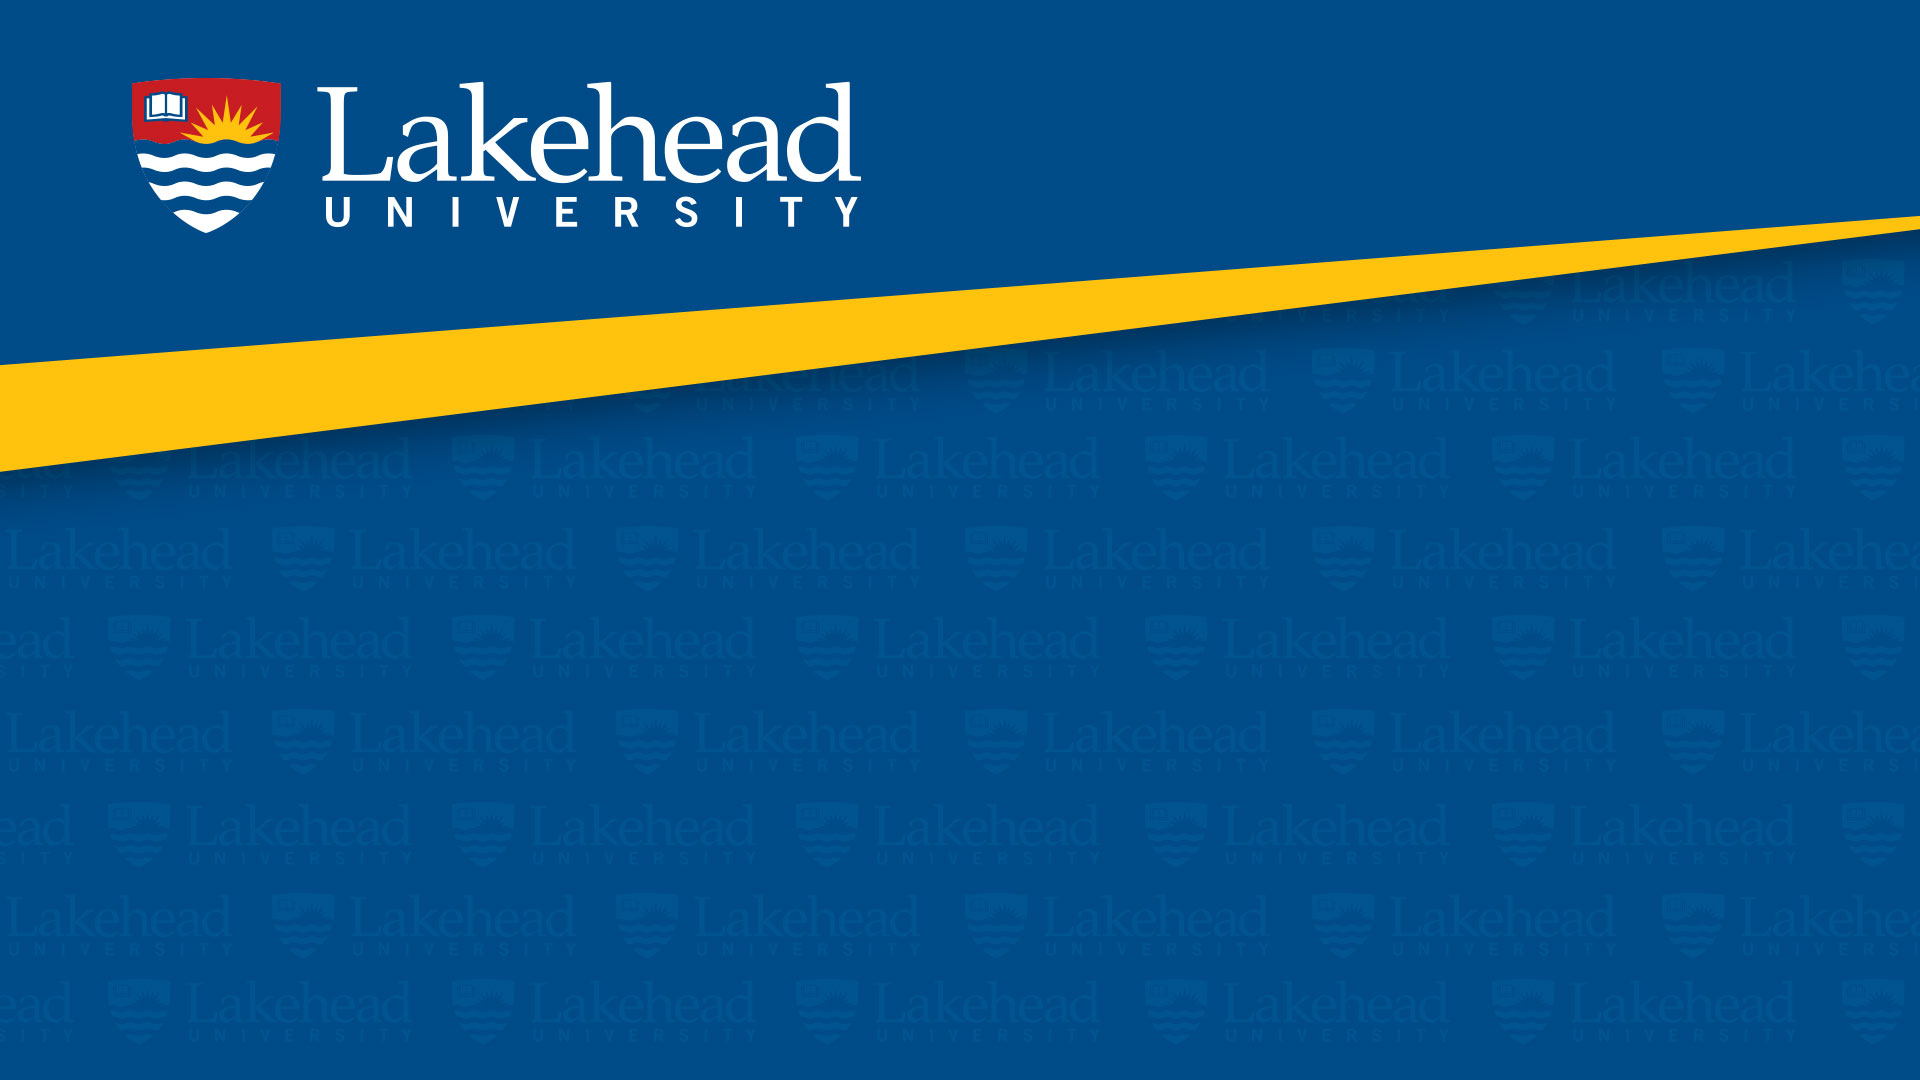 A zoom background with the Lakehead University logo repeating